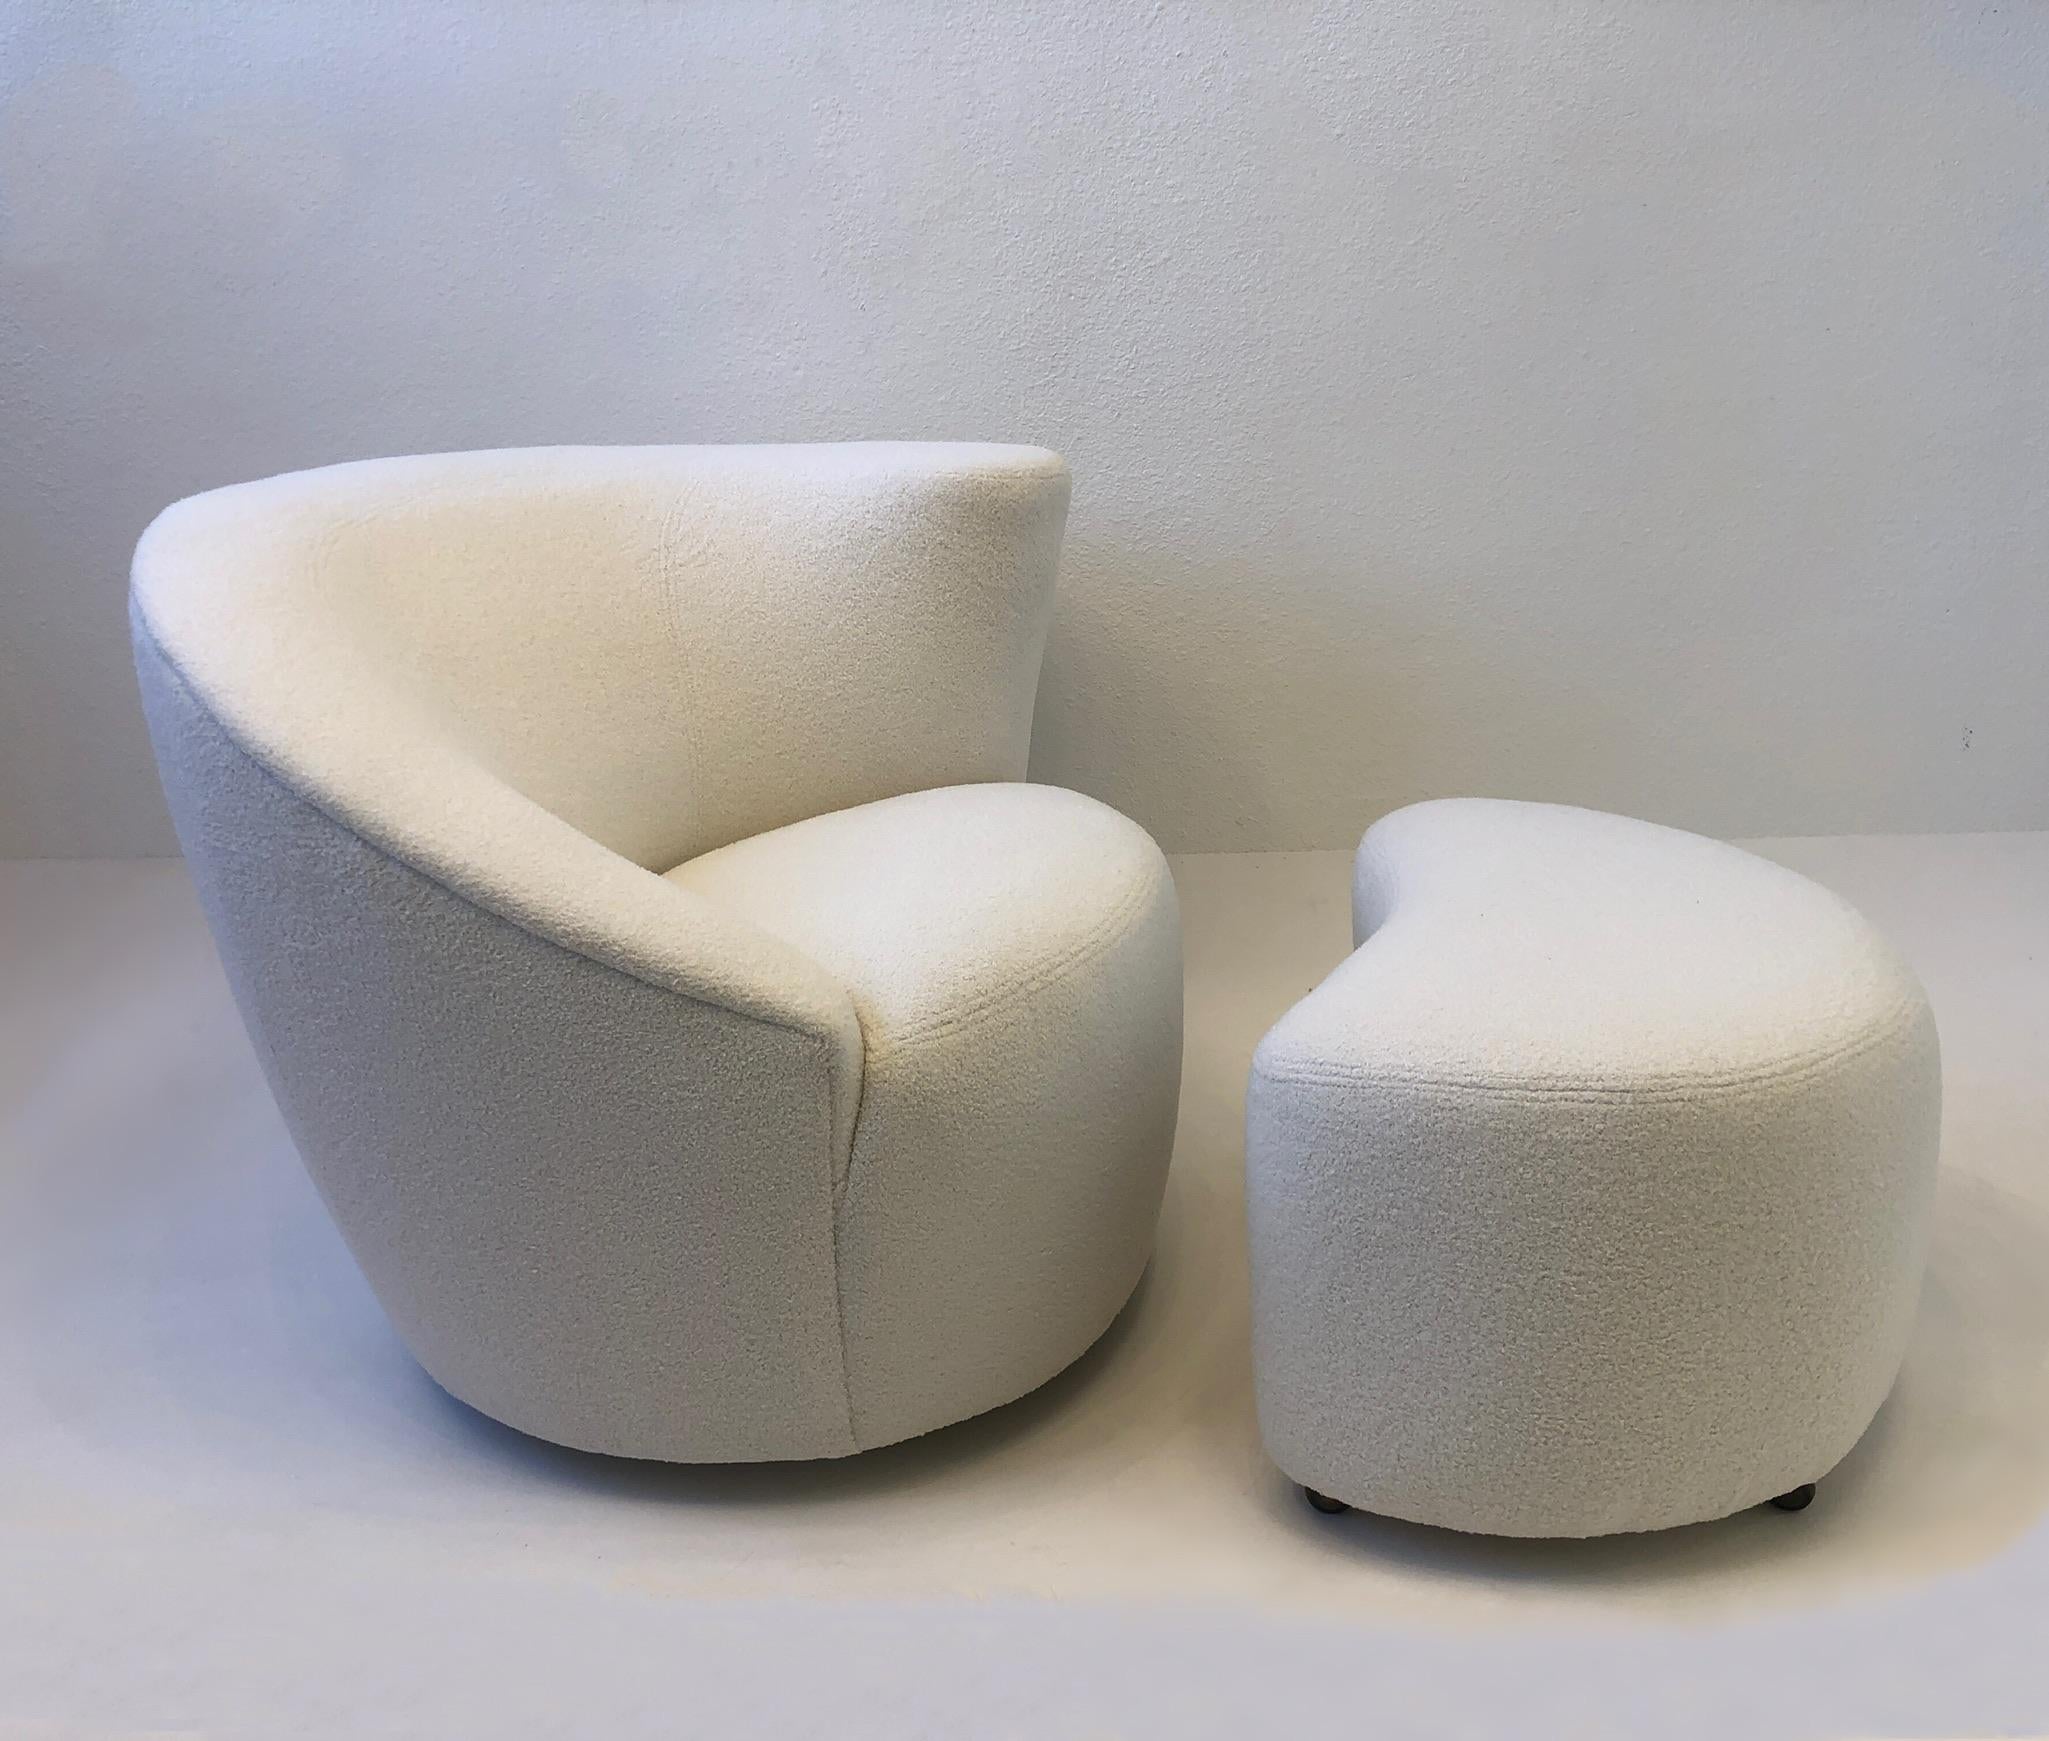 1990’s Pair of ‘Corkscrew’ lounge chairs and ottomans designed by Vladimir Kagan for Directional.
Newly recovered in a soft boucle fabric. The chairs rotate 180 and return to original position, the ottoman have aged brass casters. 
Measurements: